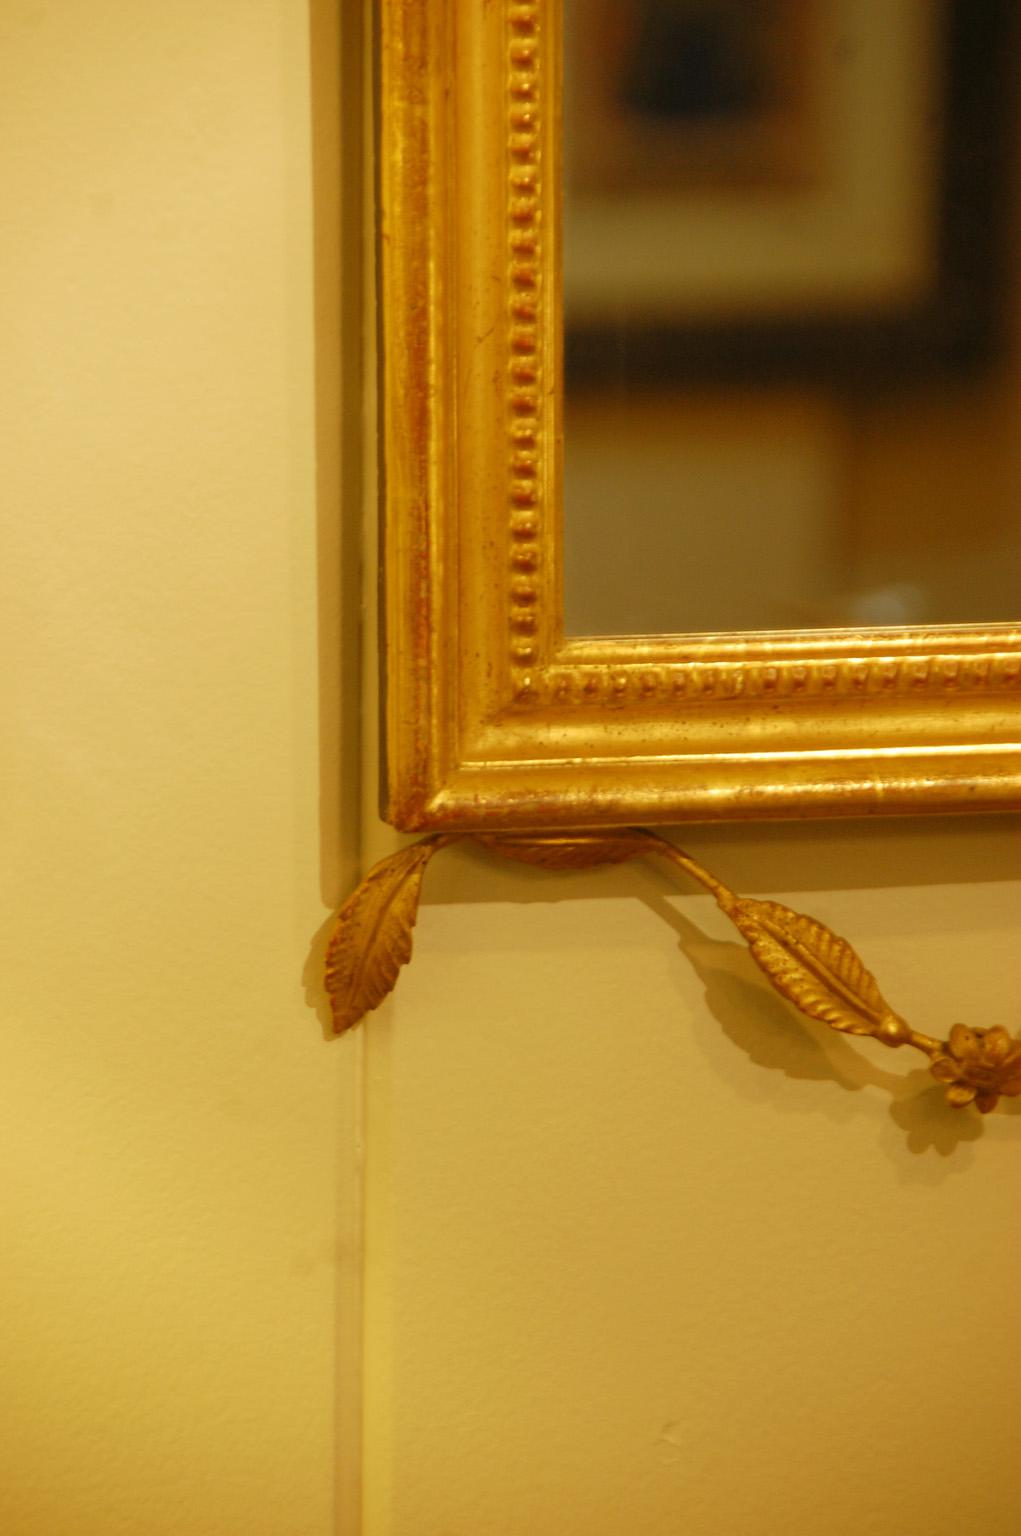 18th Century English Georgian Hepplewhite Period Gold Leaf Mirror with Urn, Leaves and Swags